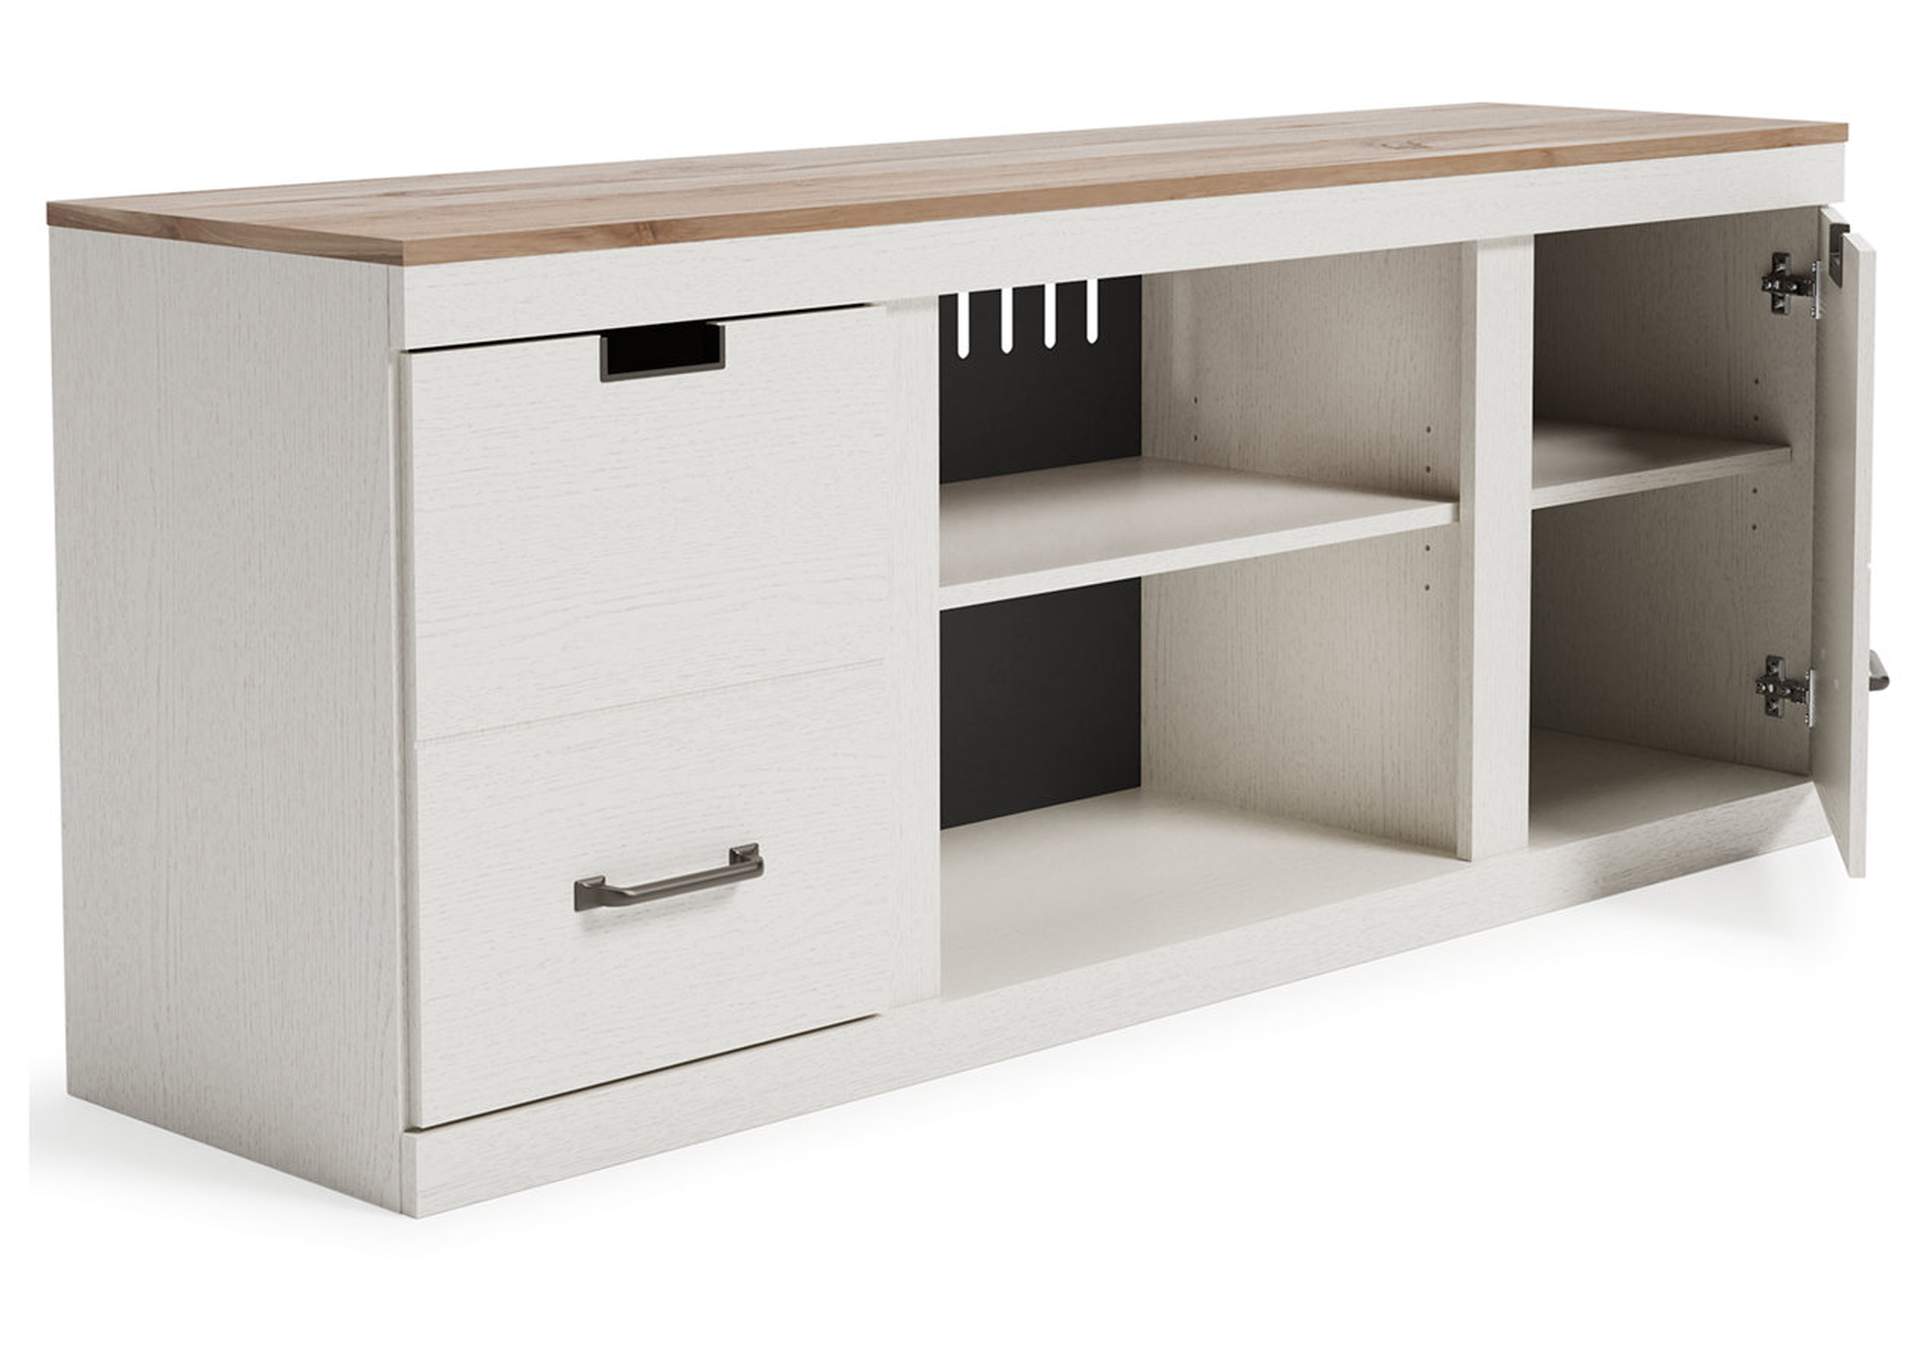 Vaibryn 60" TV Stand,Signature Design By Ashley